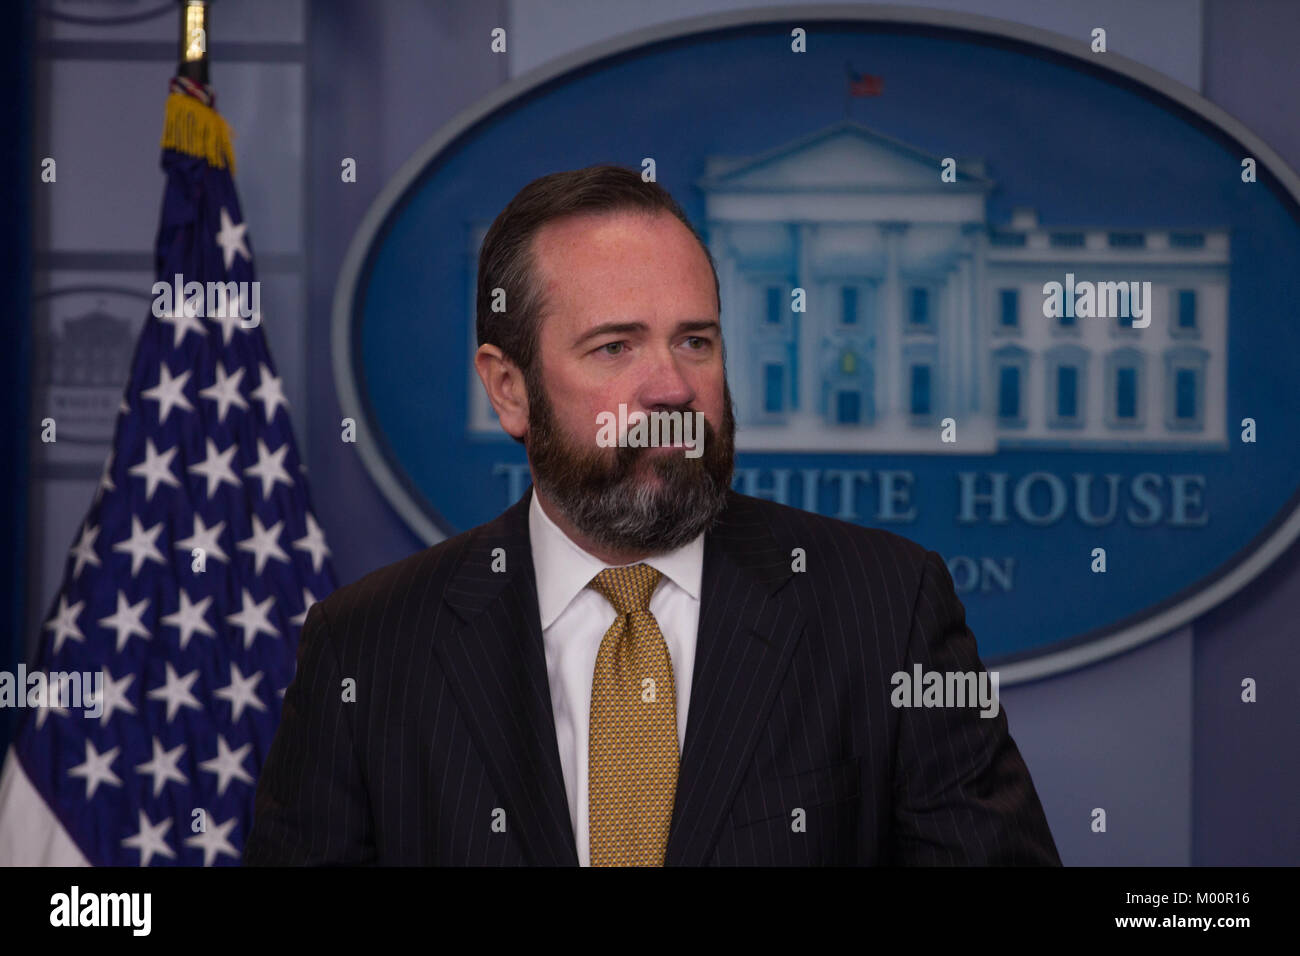 Washington, United States. 17th Jan, 2018. Department of Justice principal deputy assistant attorney general Ed O'Callaghan takes questions at the White House from reporters about the DOJ's joint report with the Department of Homeland Security on security threats, Wednesday, January 17, 2018. Credit: Michael Candelori/Alamy Live News Stock Photo